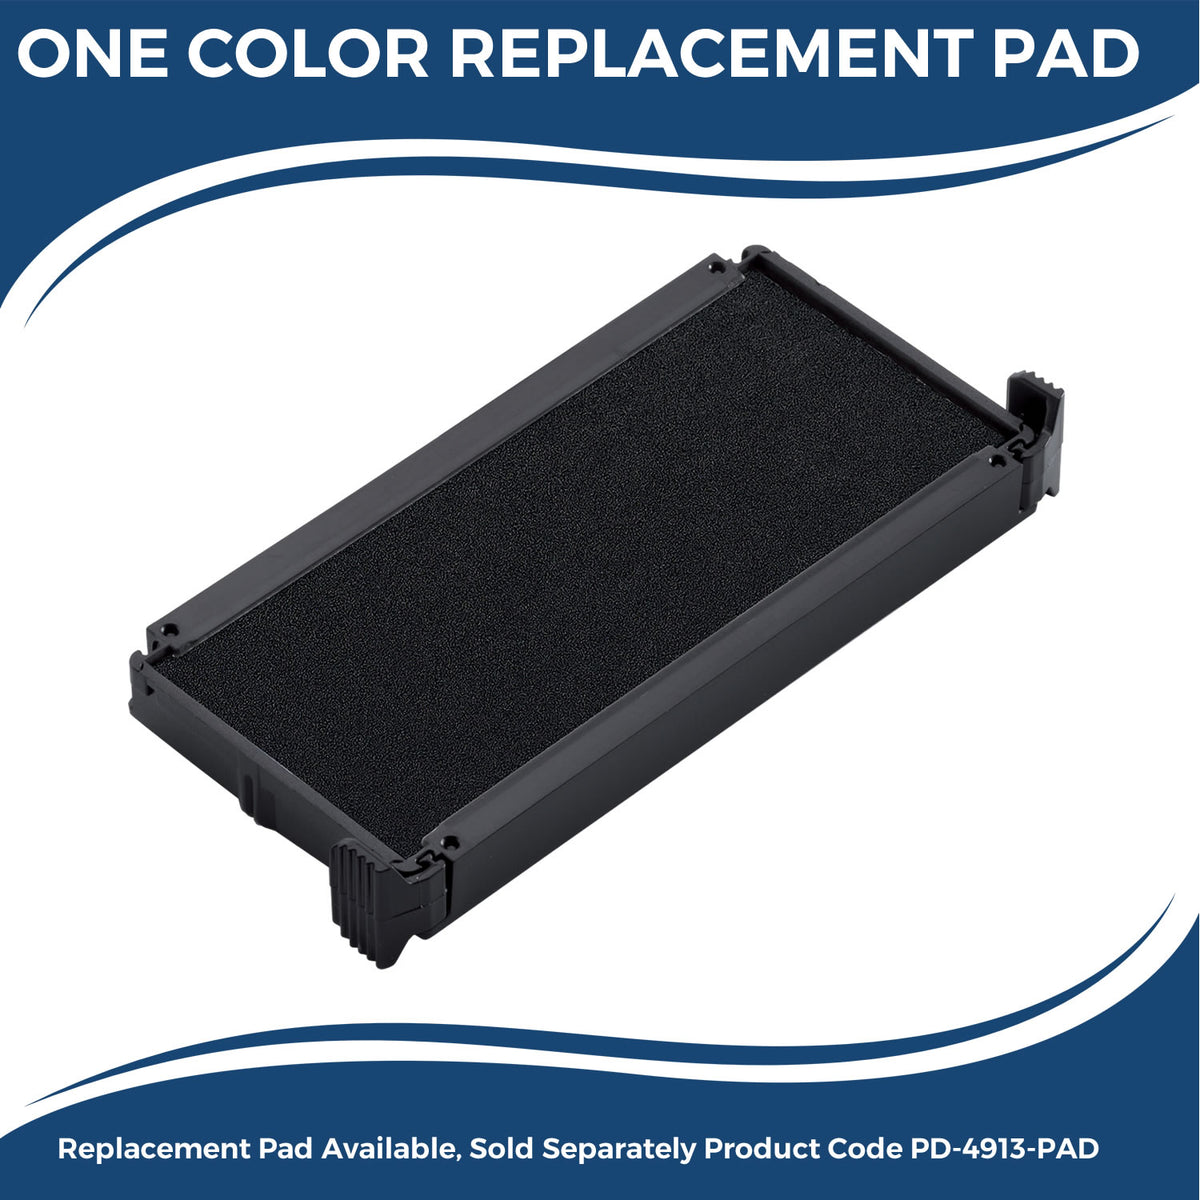 Large Self-Inking Bold Allergies Stamp 4855S Large Replacment Pad